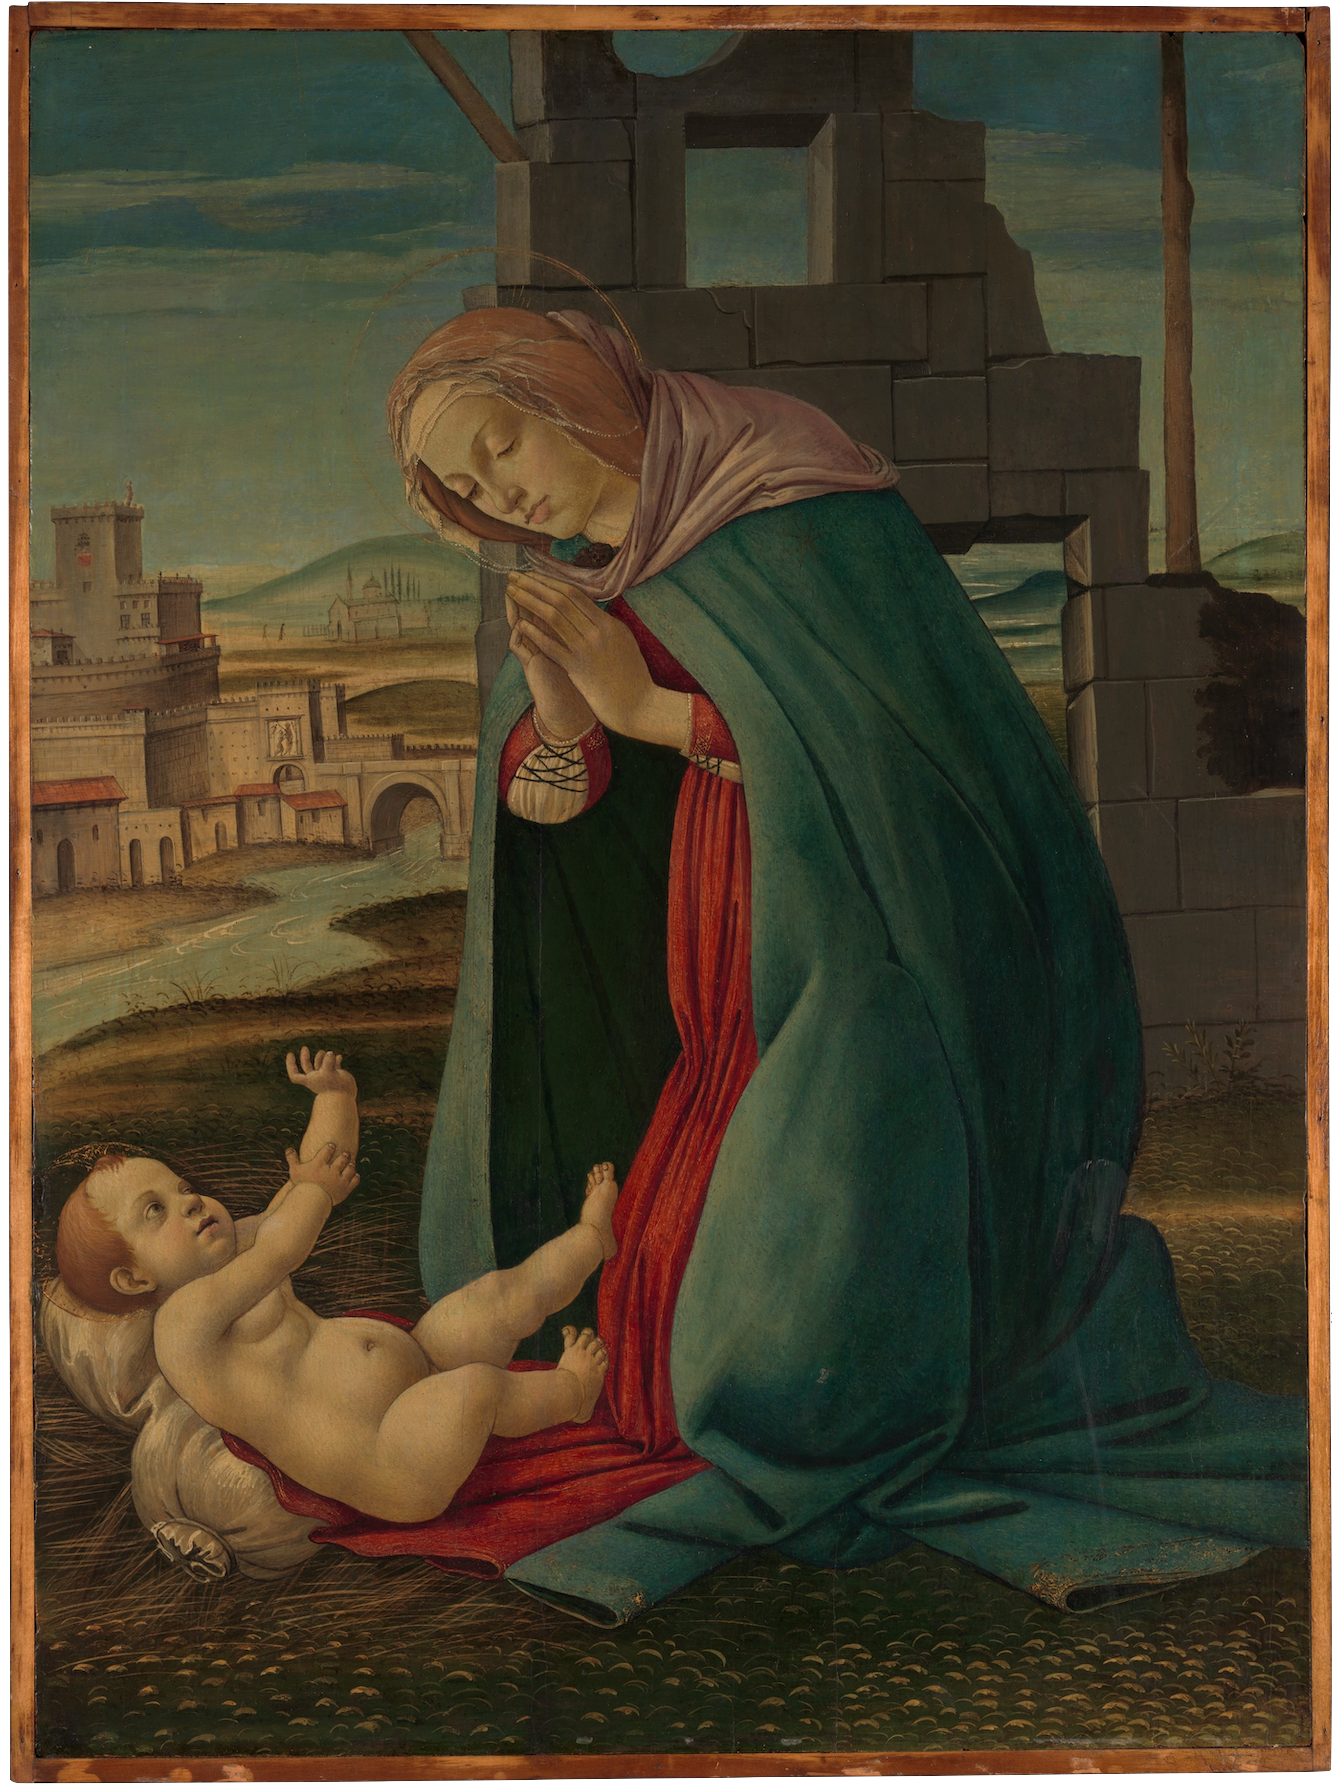 A painting of the Virgin Mary, praying over her son, an infant, who reaches up toward her.